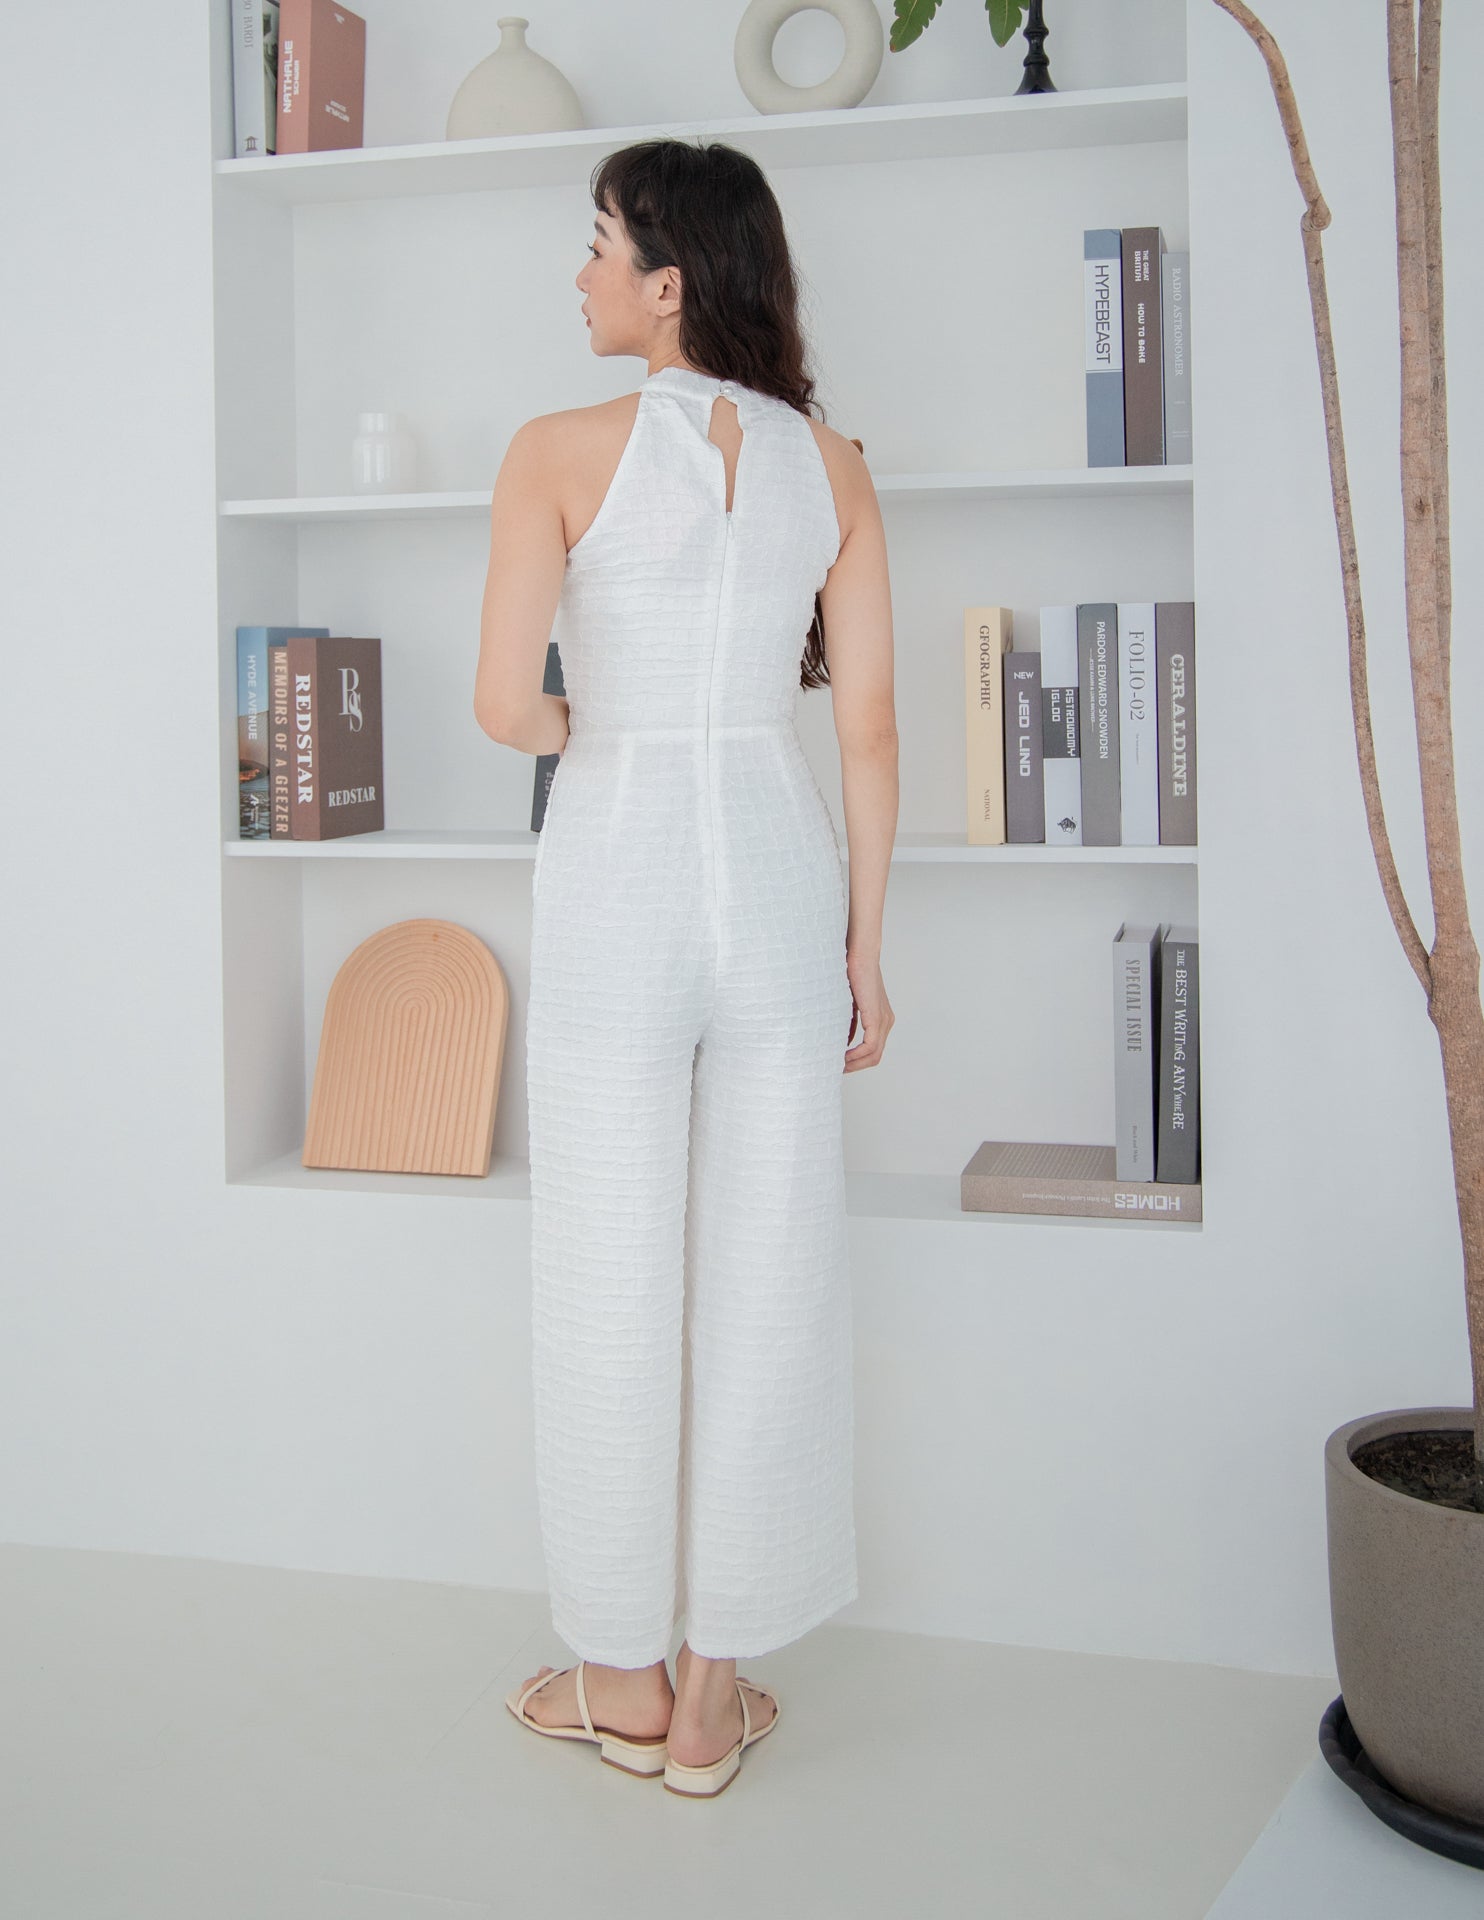 Madeline Textured Jumpsuit in White